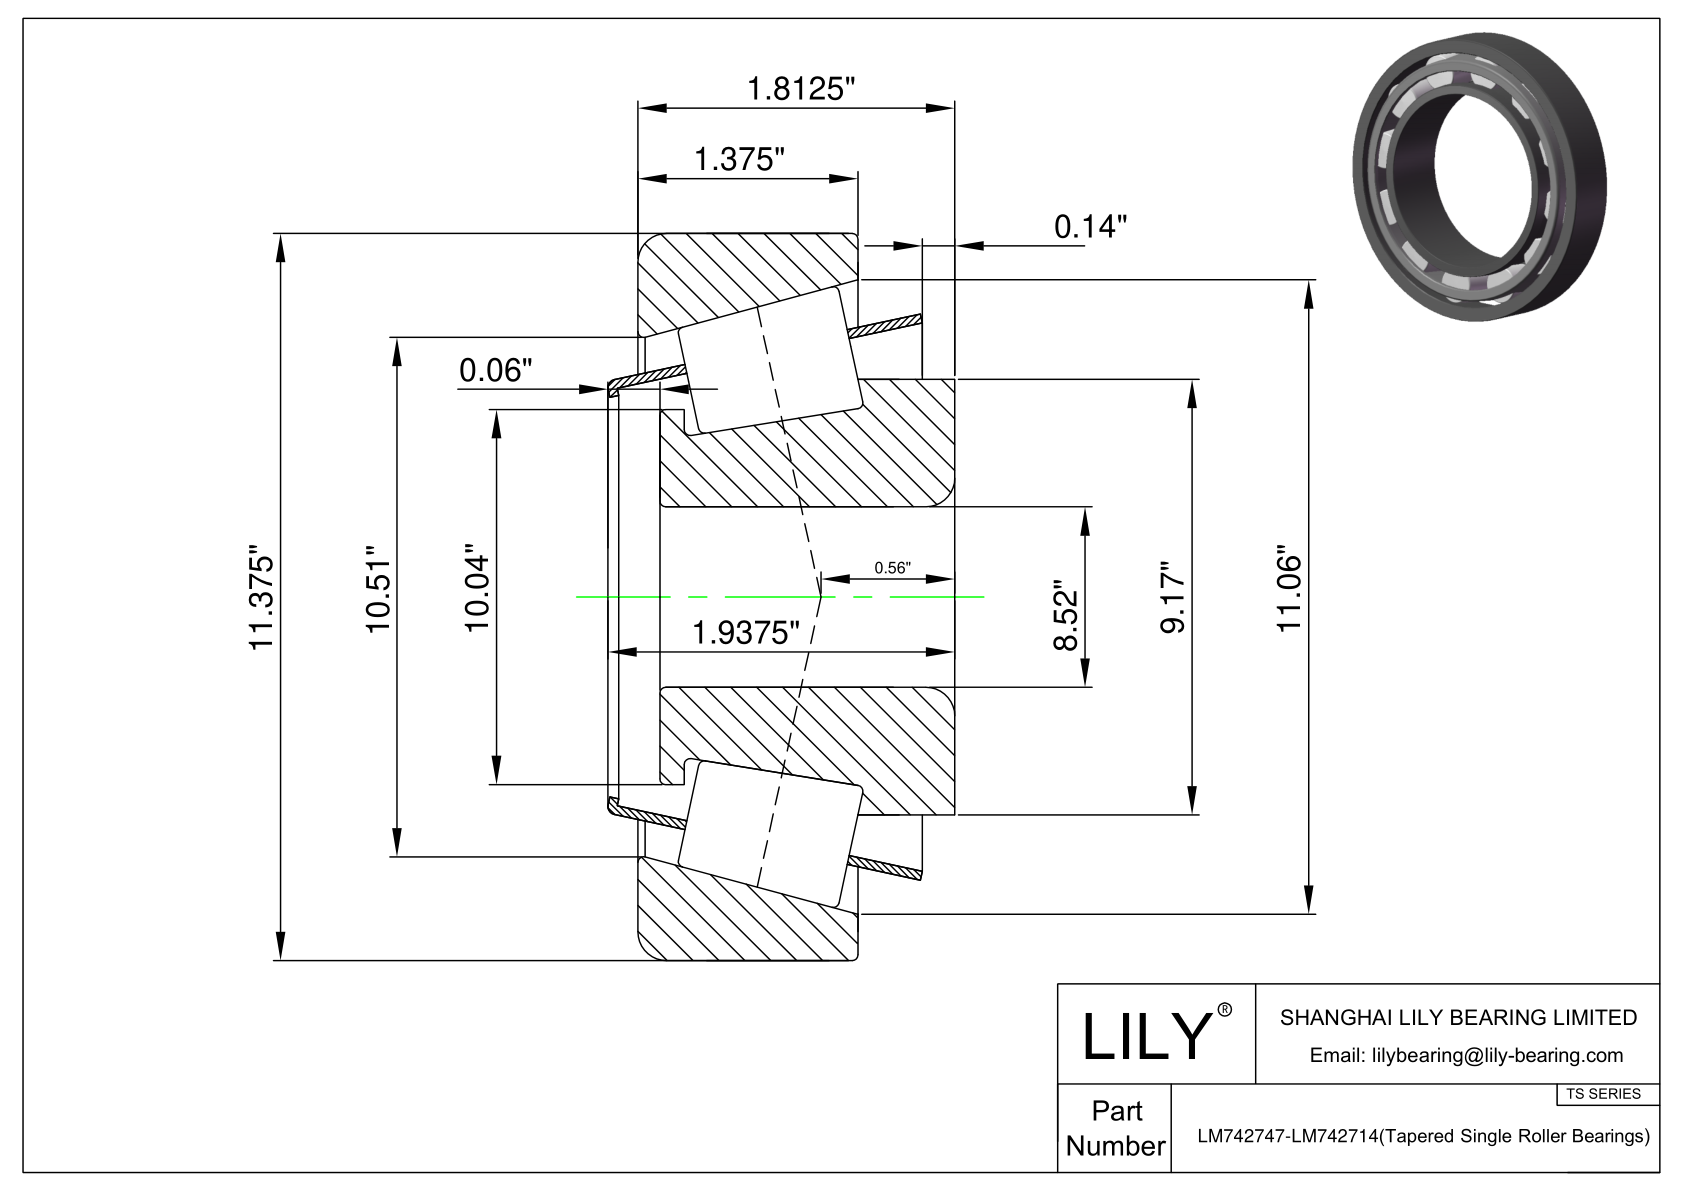 LM742747-LM742714 TS (Tapered Single Roller Bearings) (Imperial) cad drawing